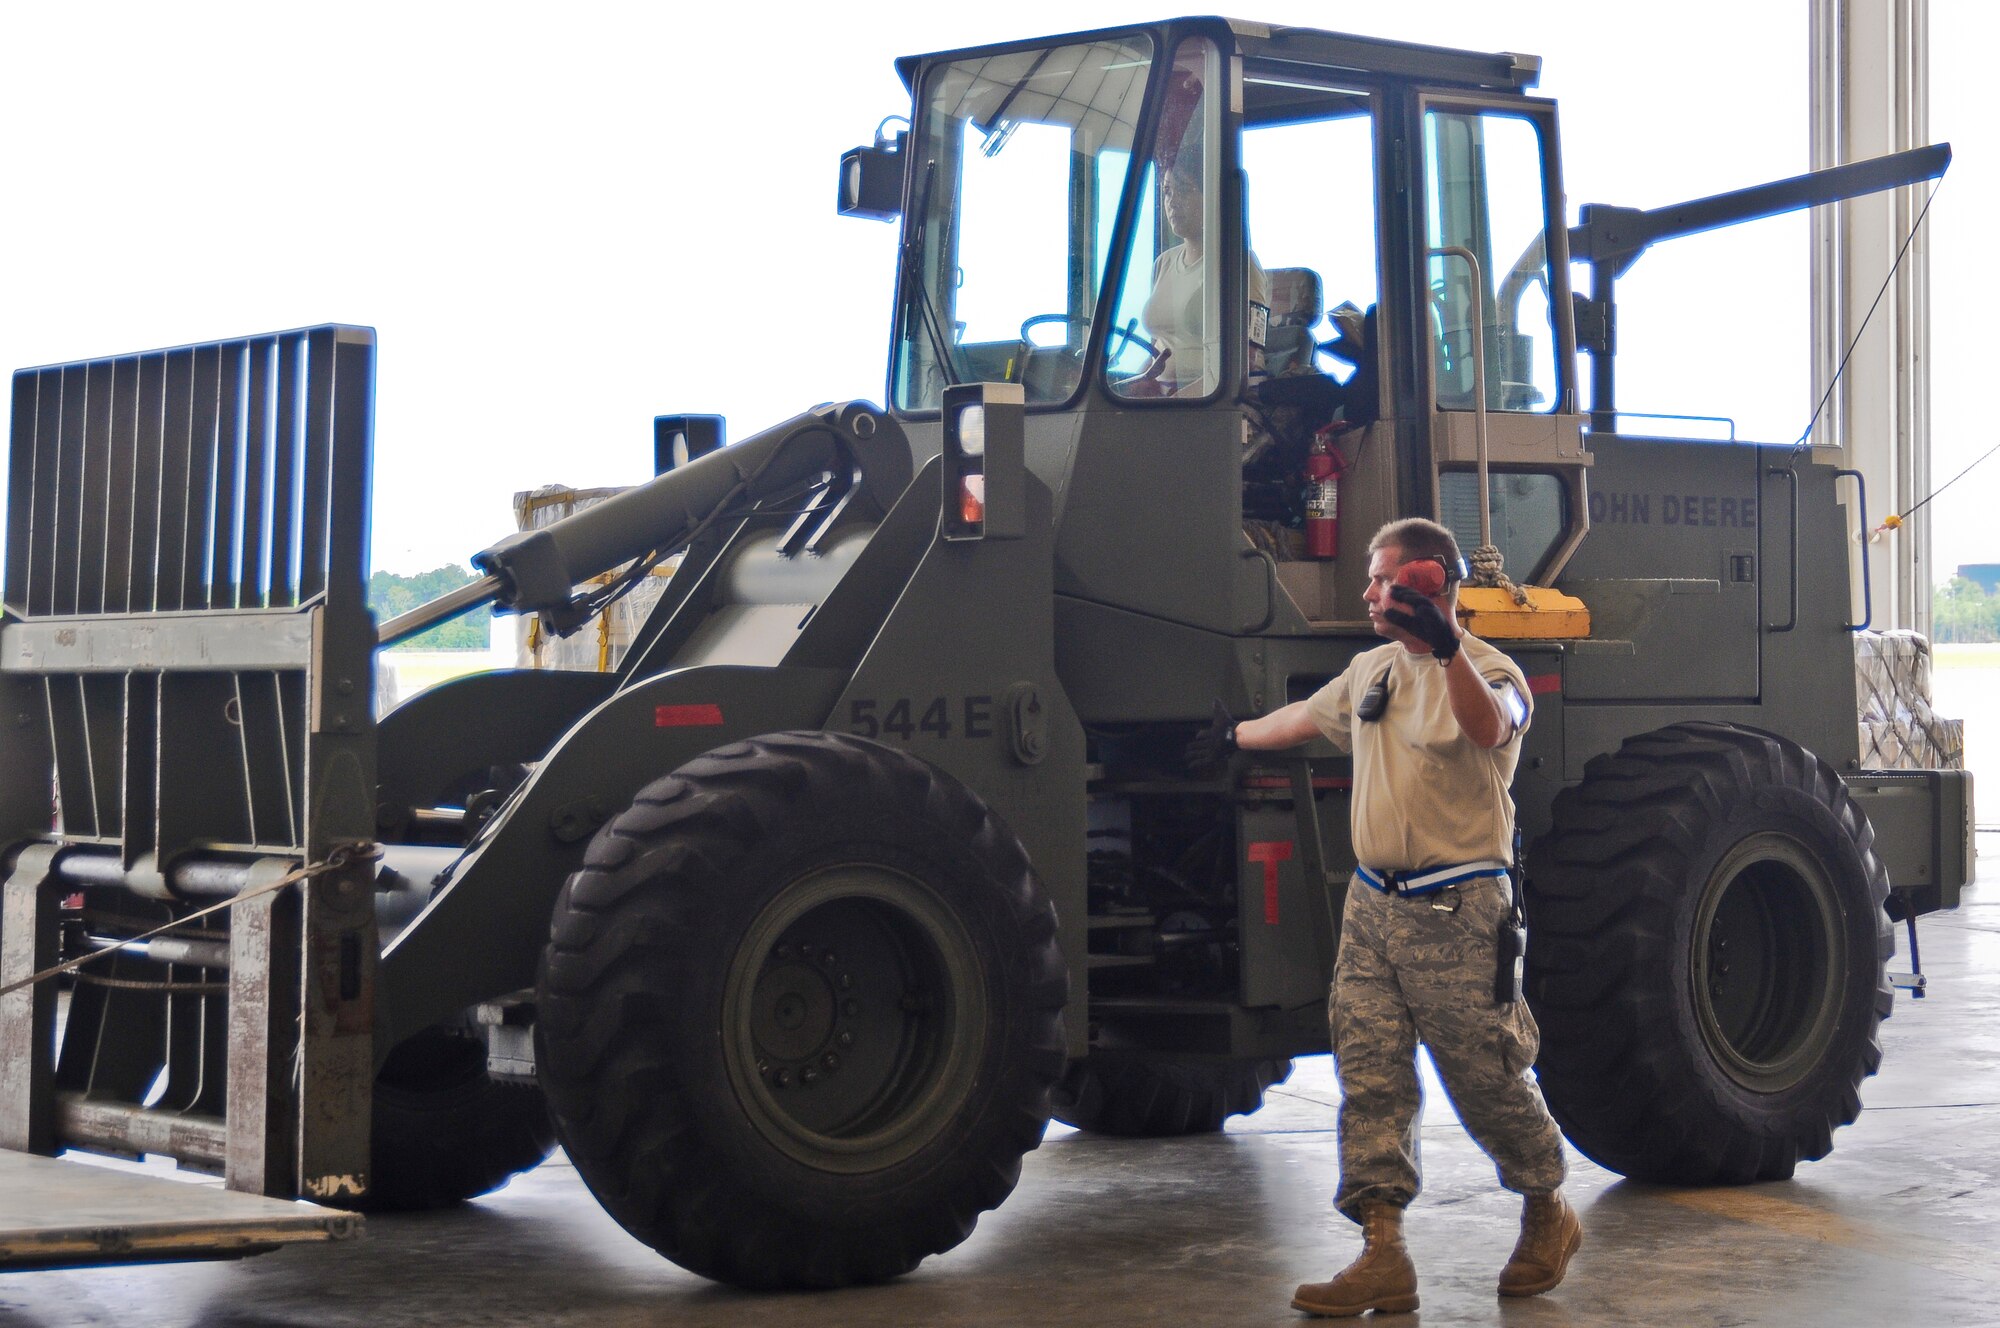 An Airman from the Air Force Reserve's 70th Aerial Port Squadron directs a forklift in the Main Hangar at the Gulfport Combat Readiness Training Center in Gulfport, Miss., on May 19, 2010. The cargo movement was part of an AMC Operational Readiness Inspection held in Gulfport from May 16-23. (U.S. Air Force photo/Tech. Sgt. Dennis Flora) (Released)